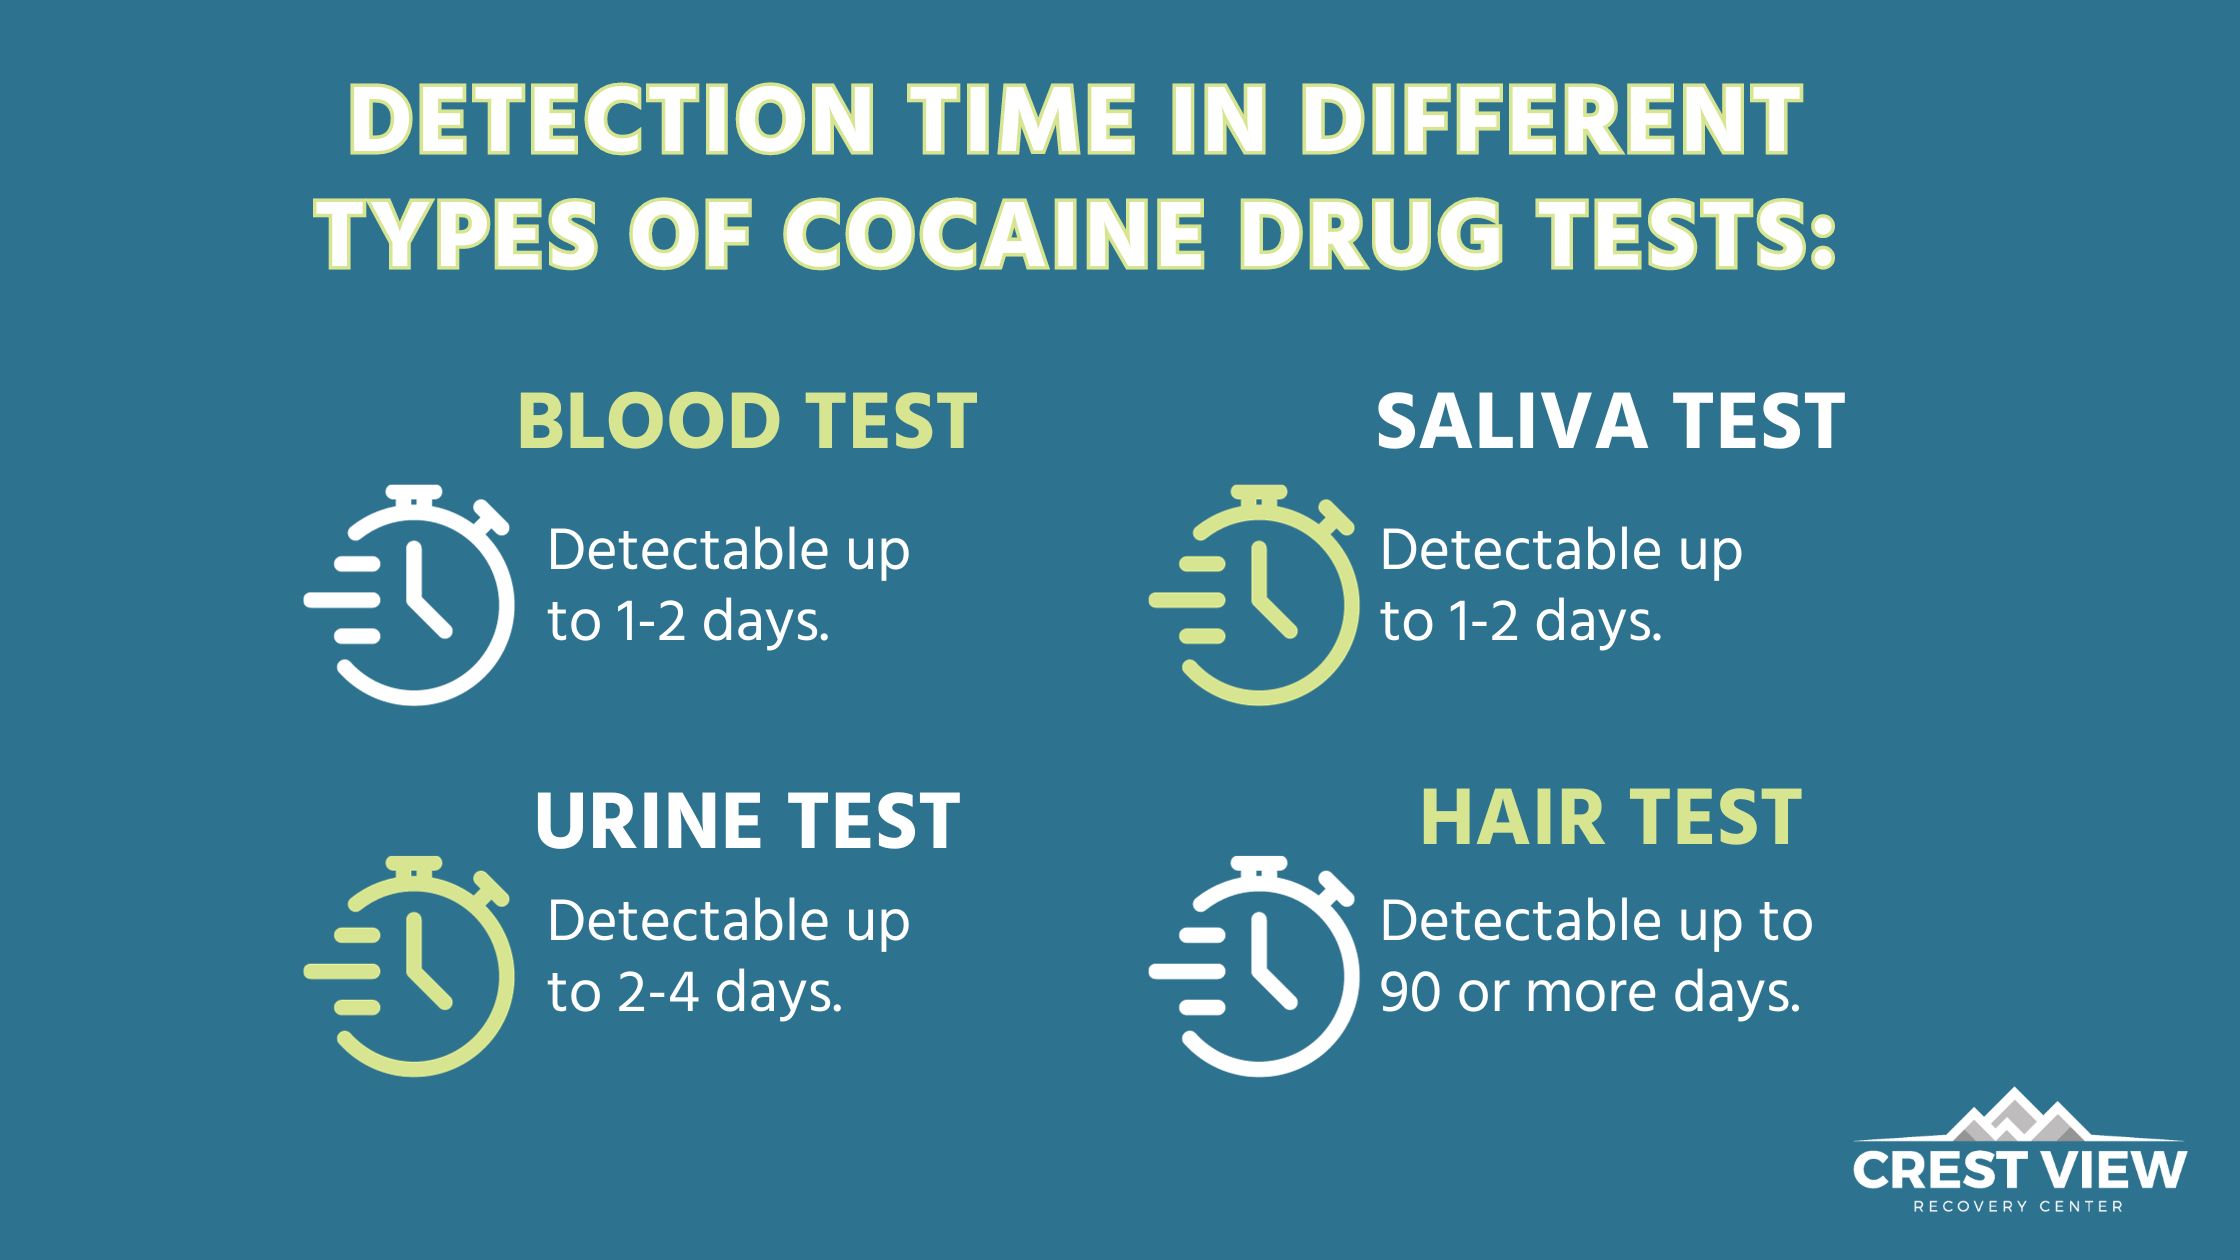 Cocaine detection time by type of drug test